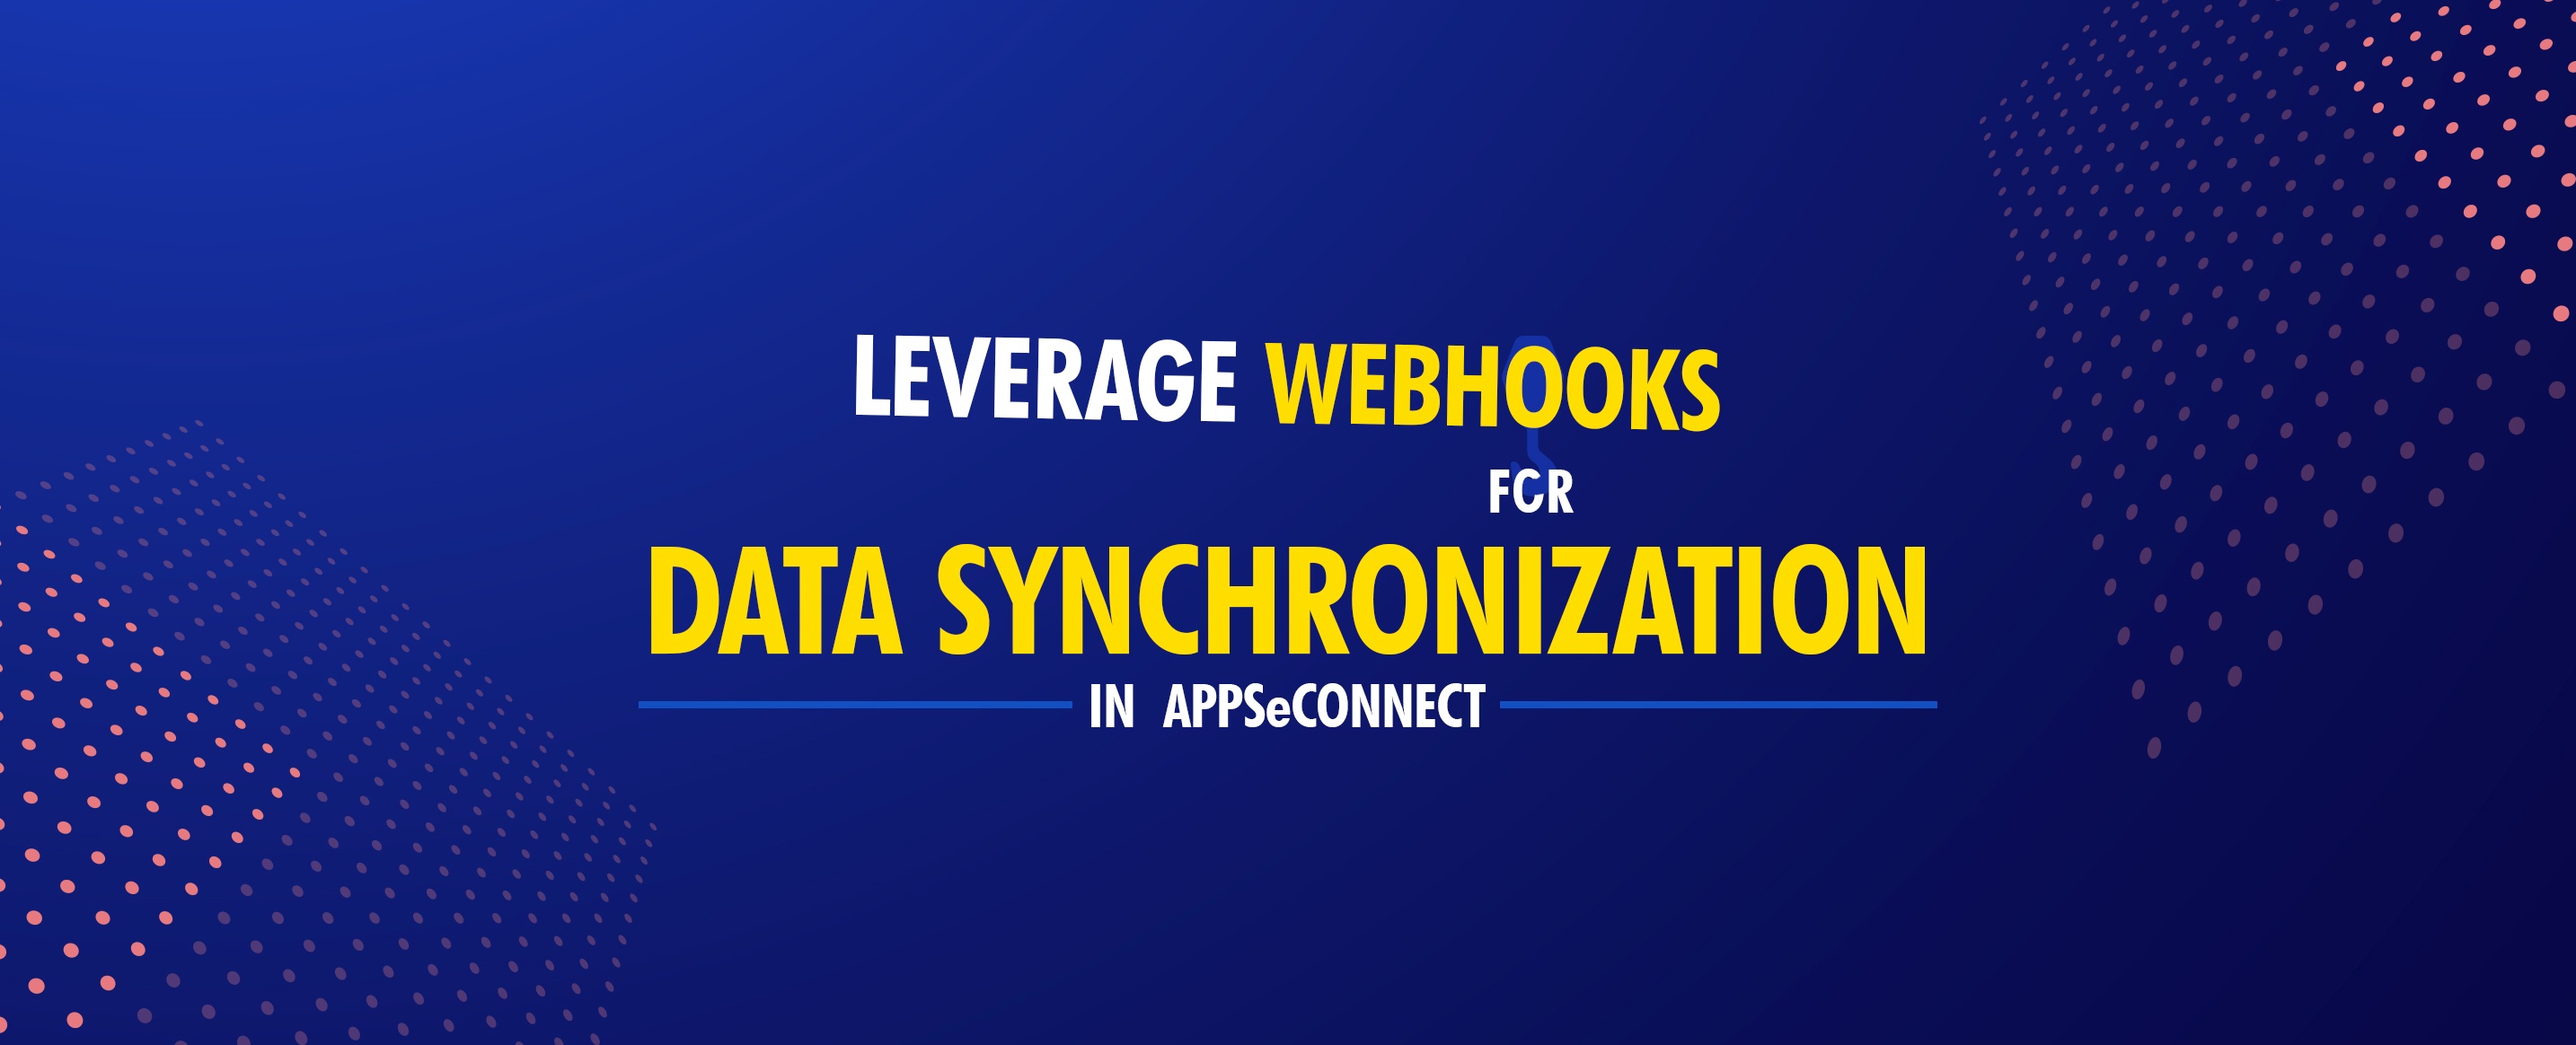 Leverage-Webhooks-for-Data-Synchronization-in-APPSeCONNECT